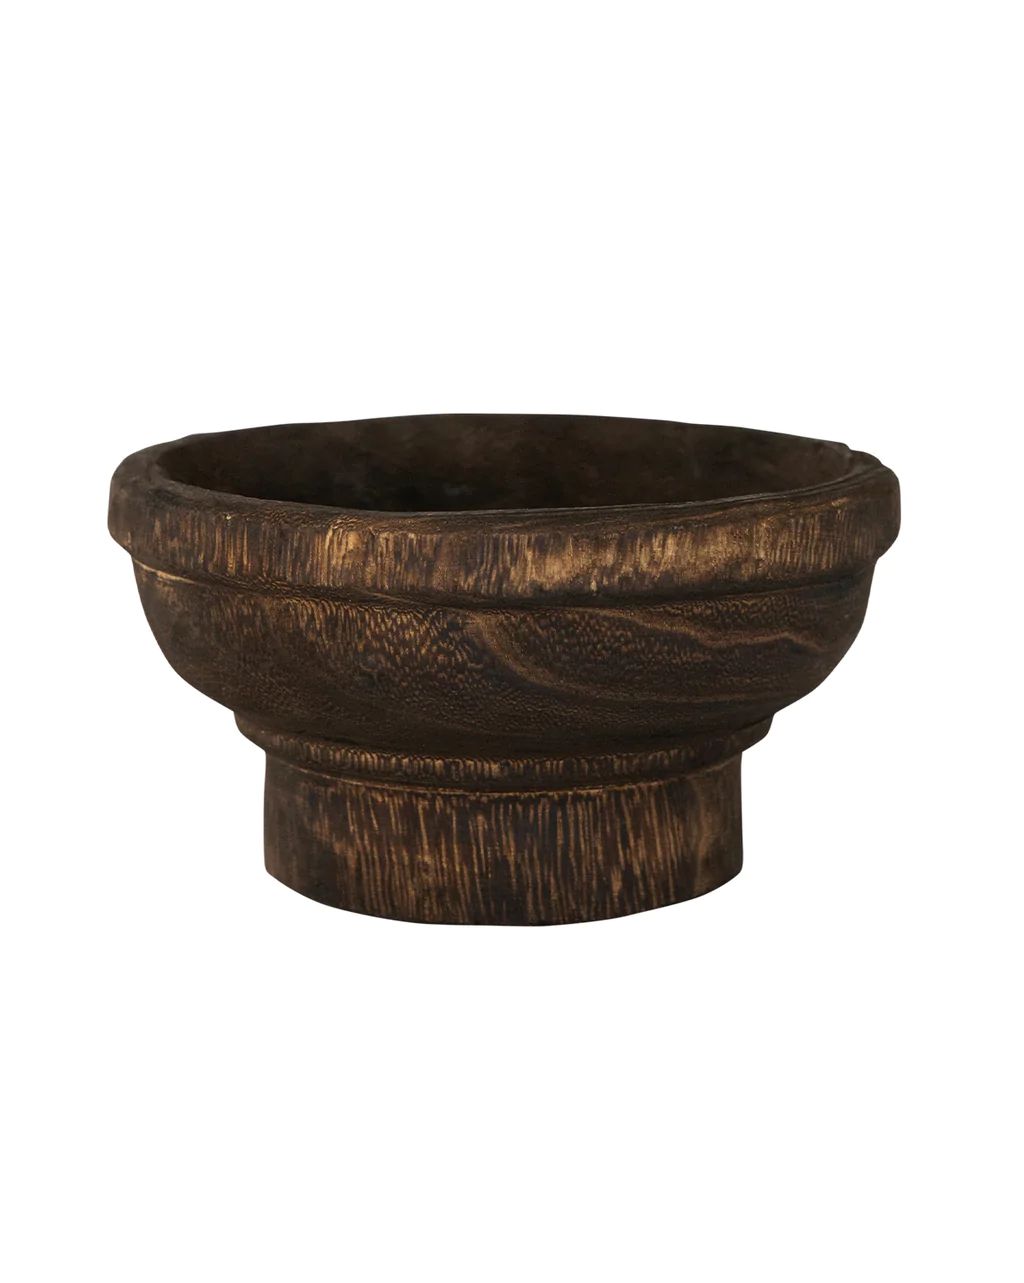 Sivan Footed Bowl | McGee & Co.